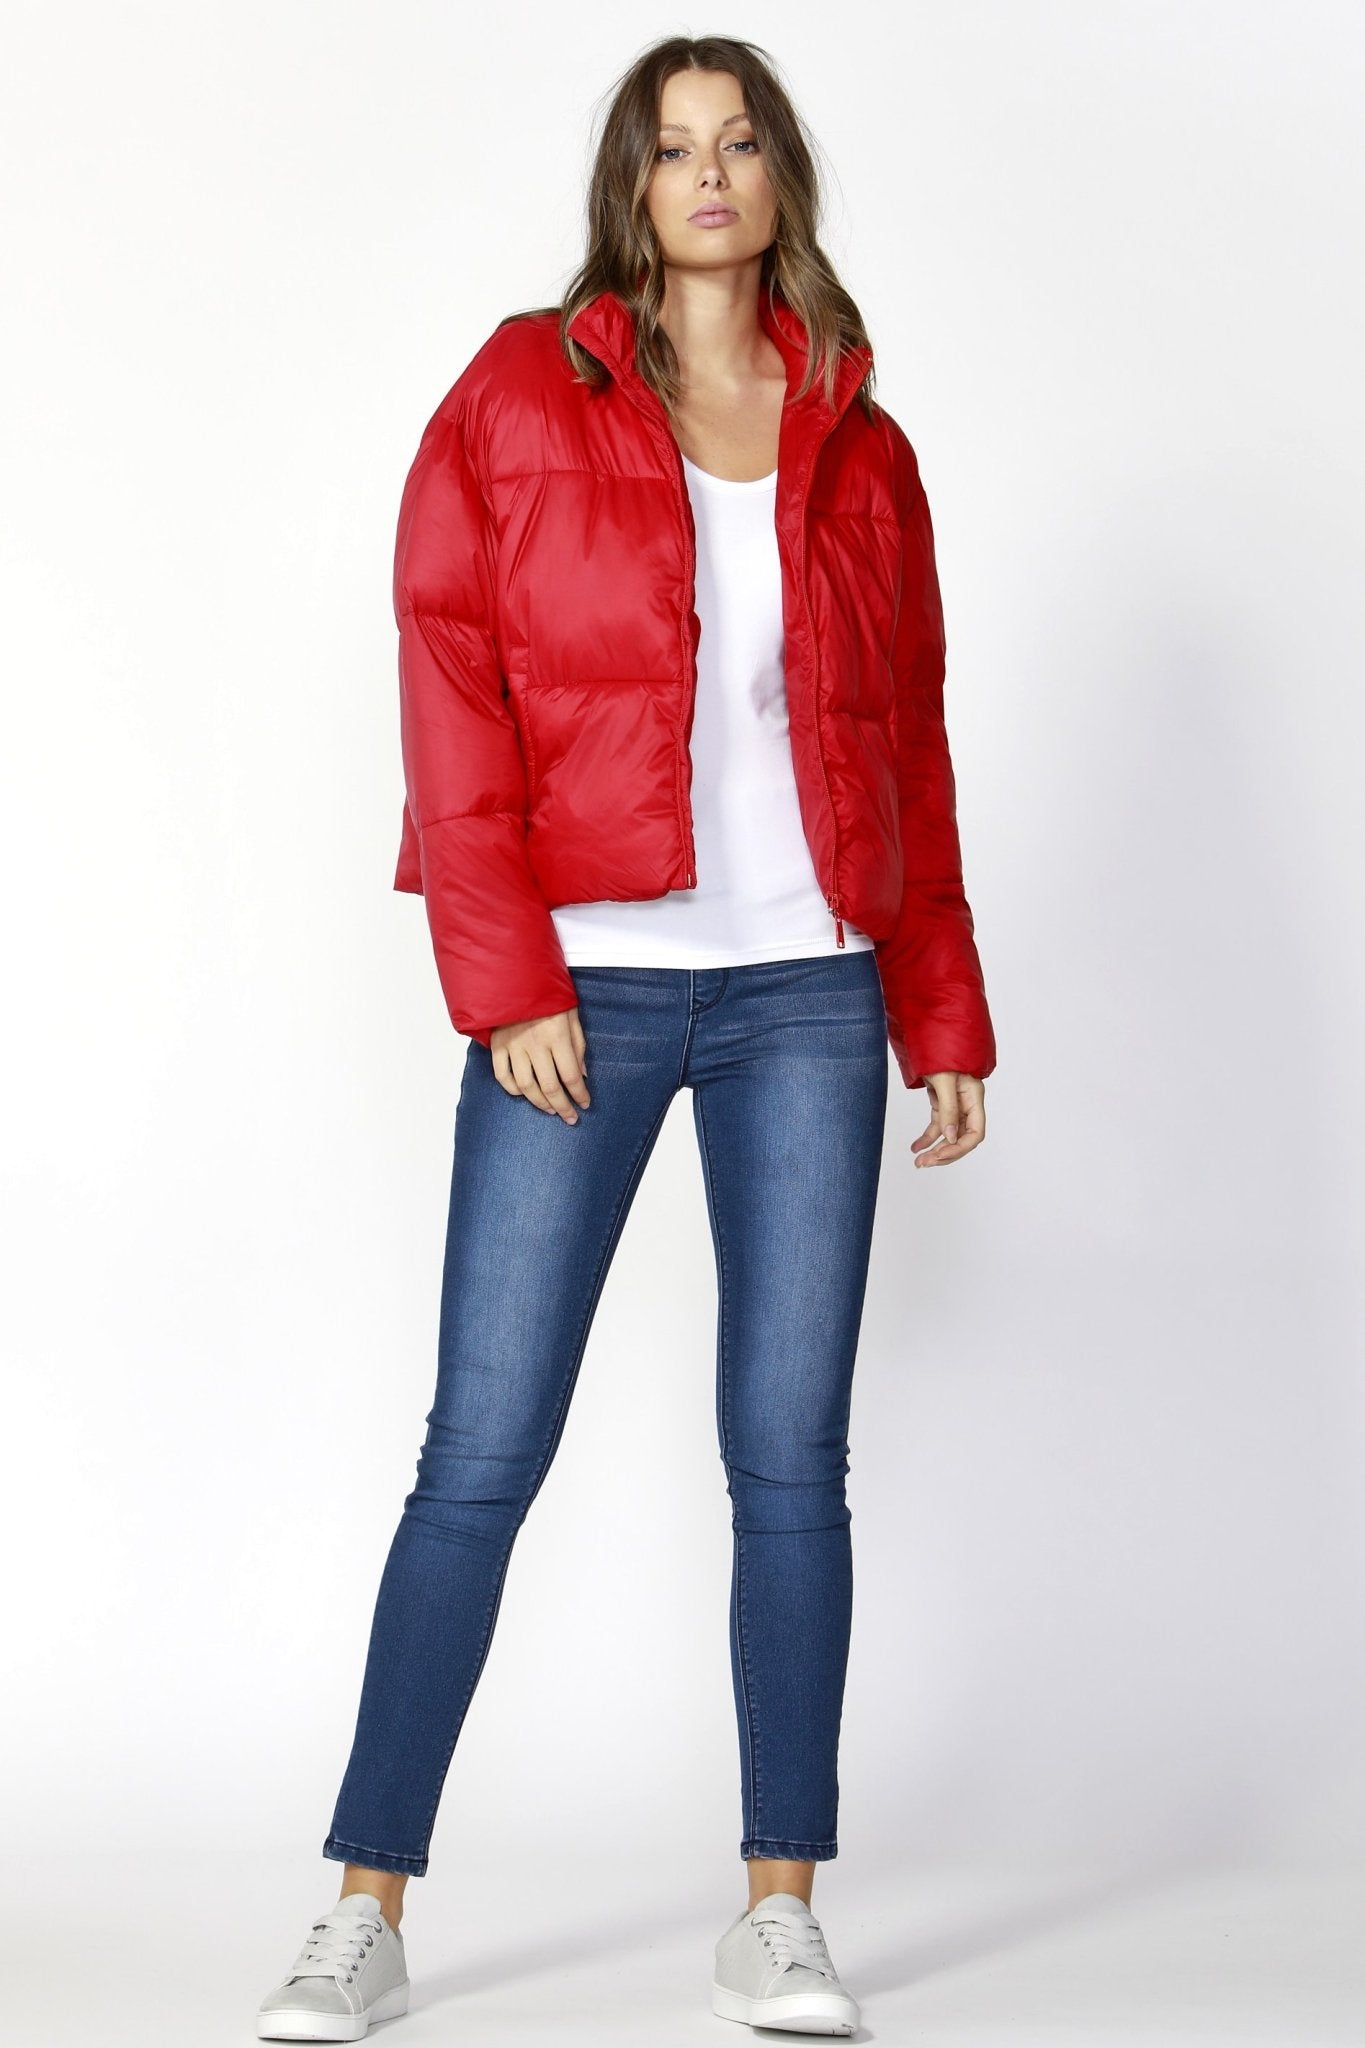 Betty Basics Dylan Cropped Puffer Jacket in Lava Red - Hey Sara